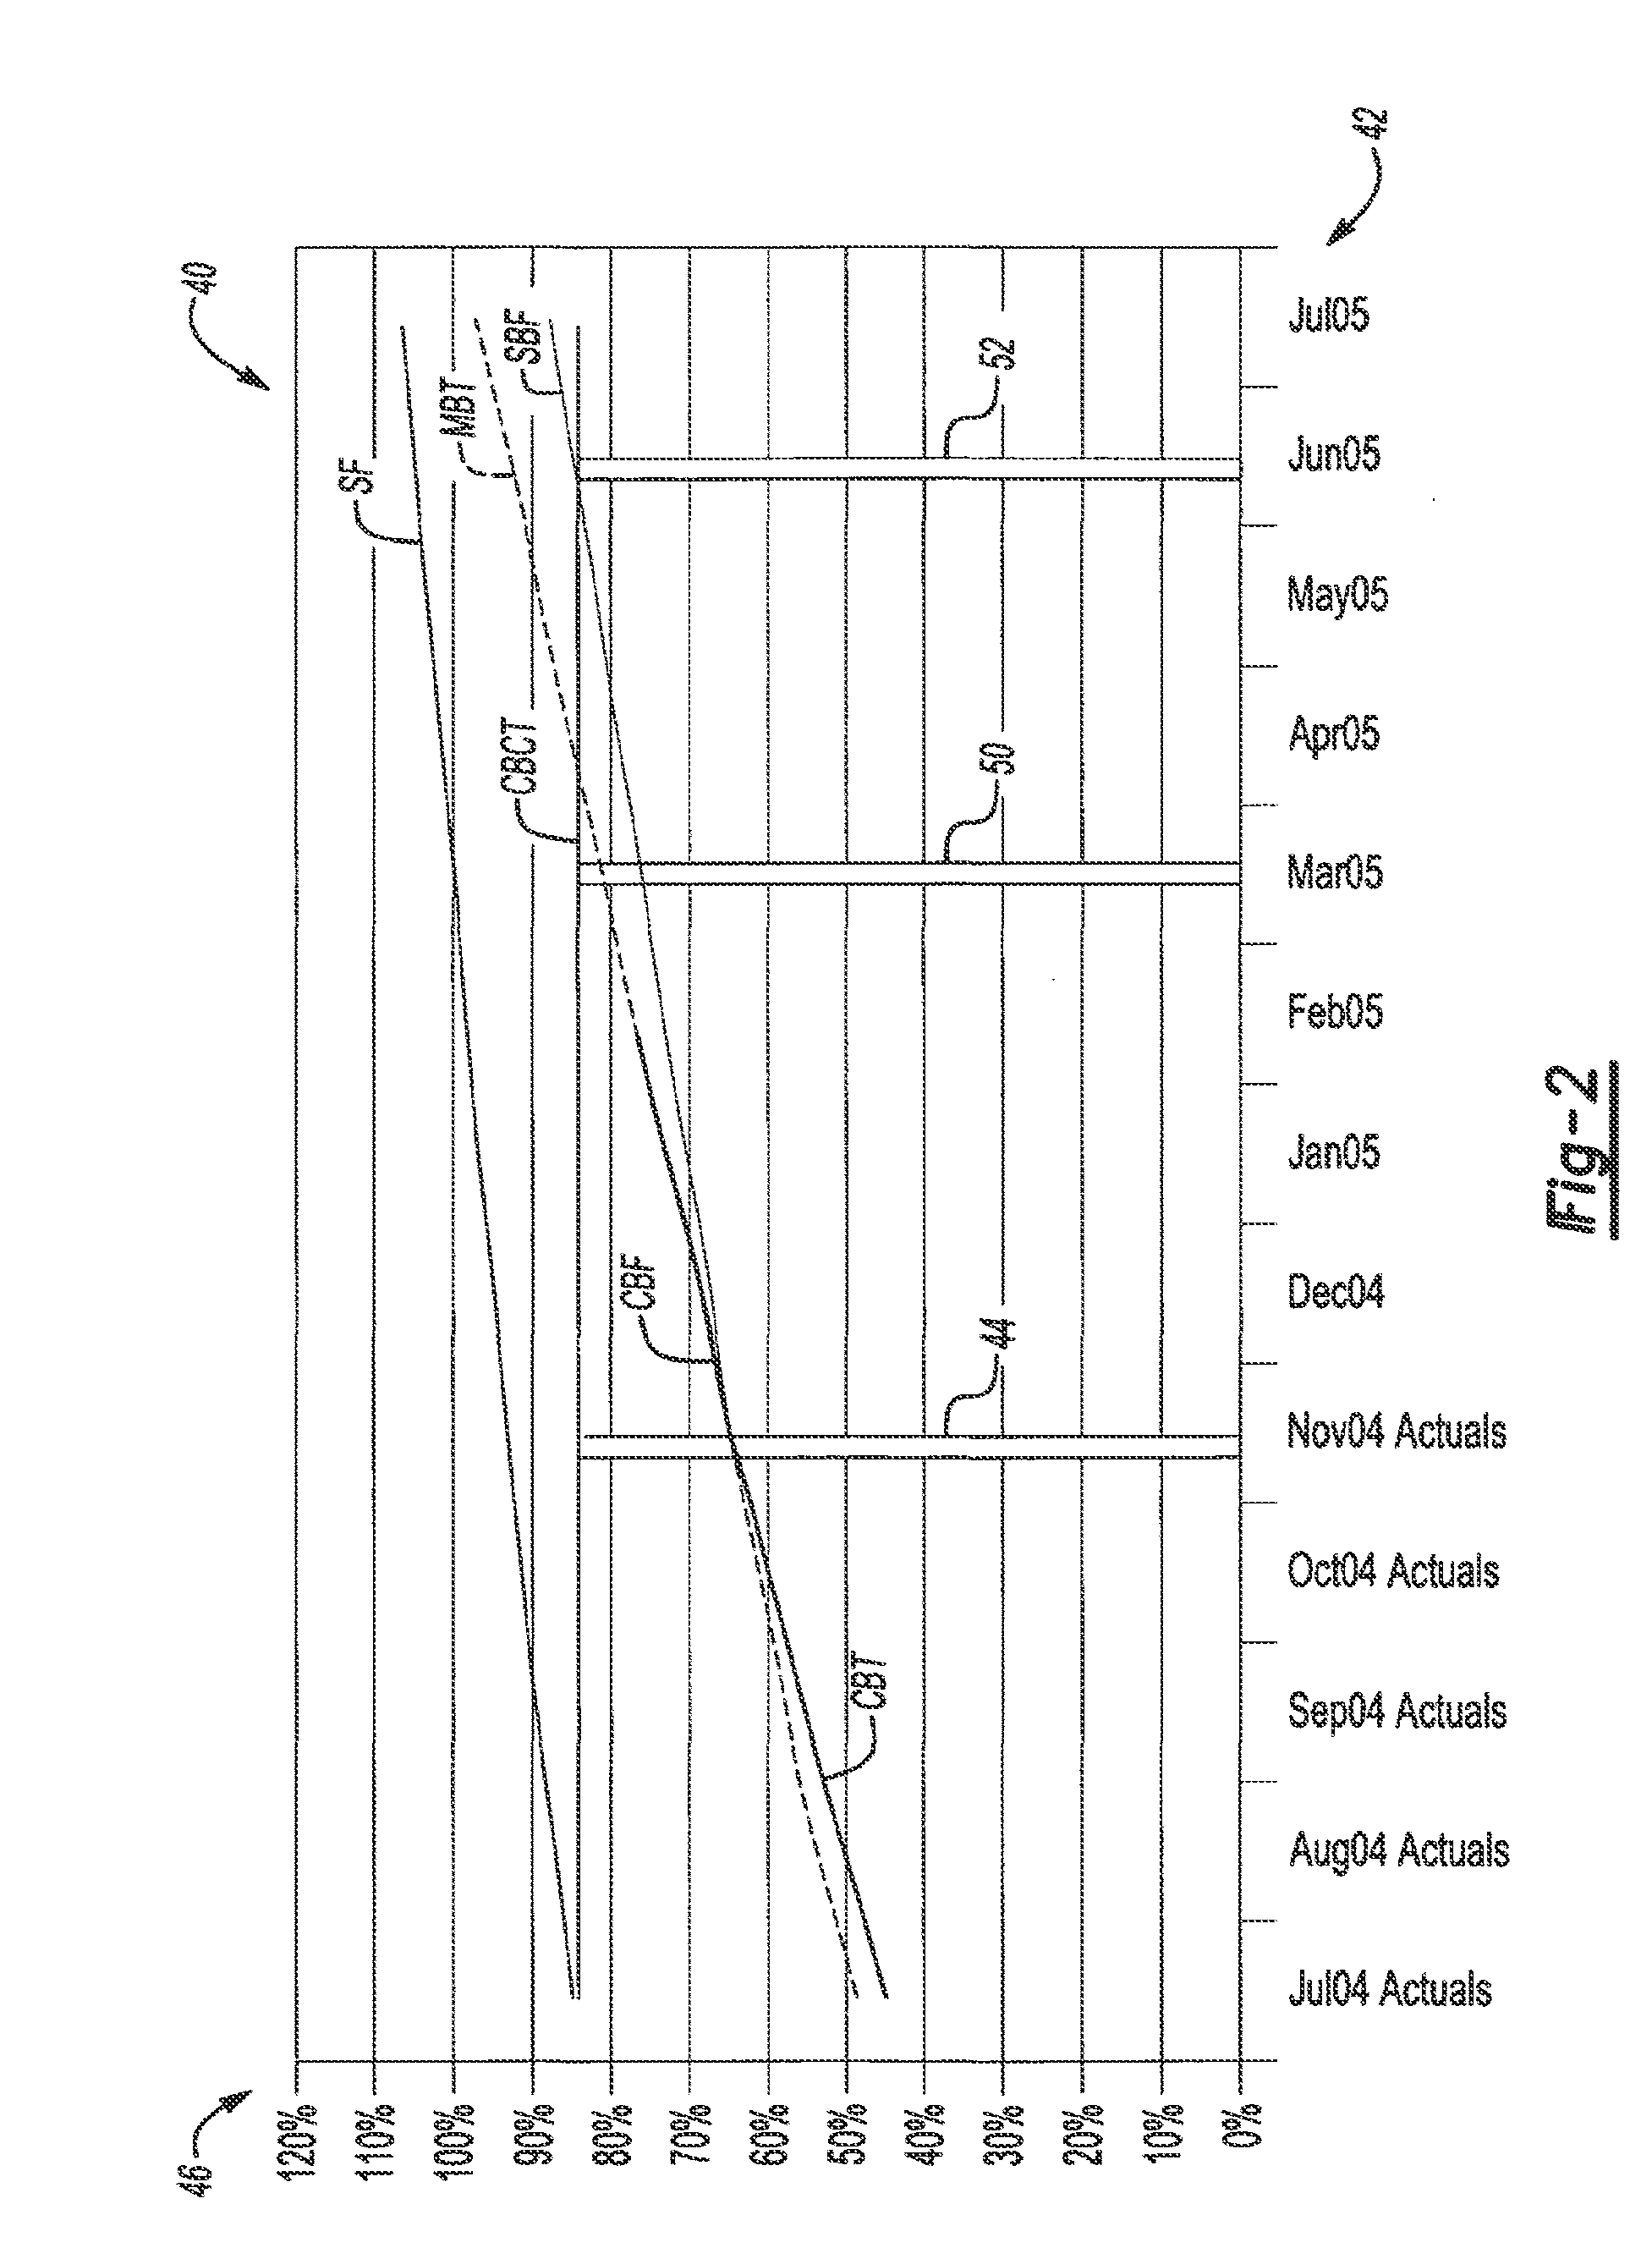 Tool for predicting capacity demands on an electronic system